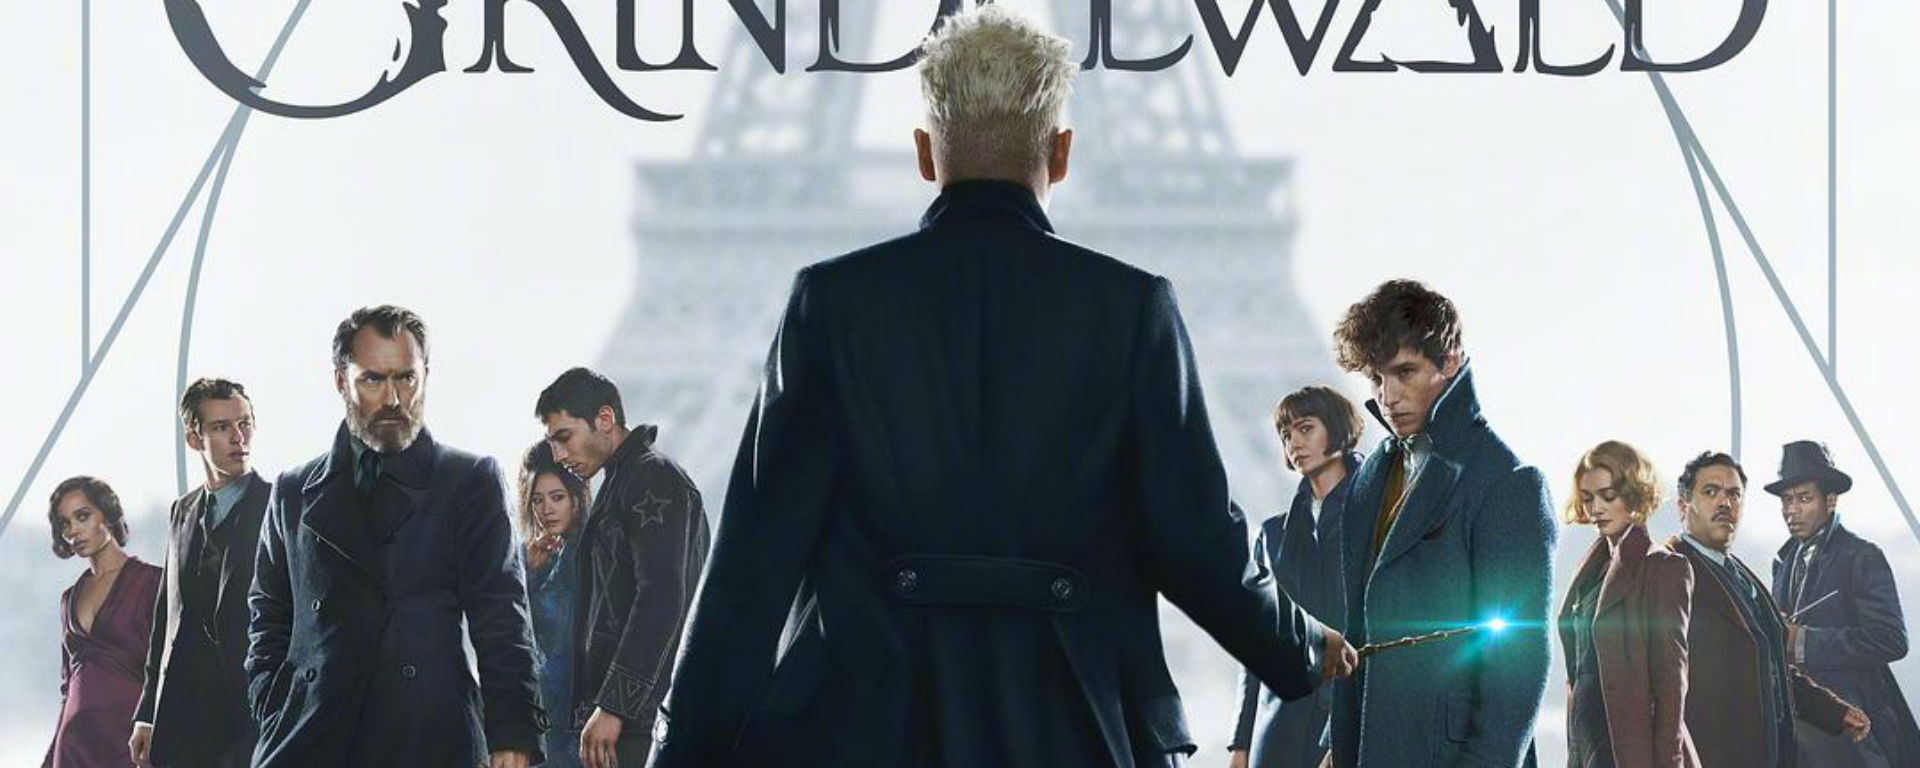 fantastic beasts the crimes of grindlewald movie review feature image